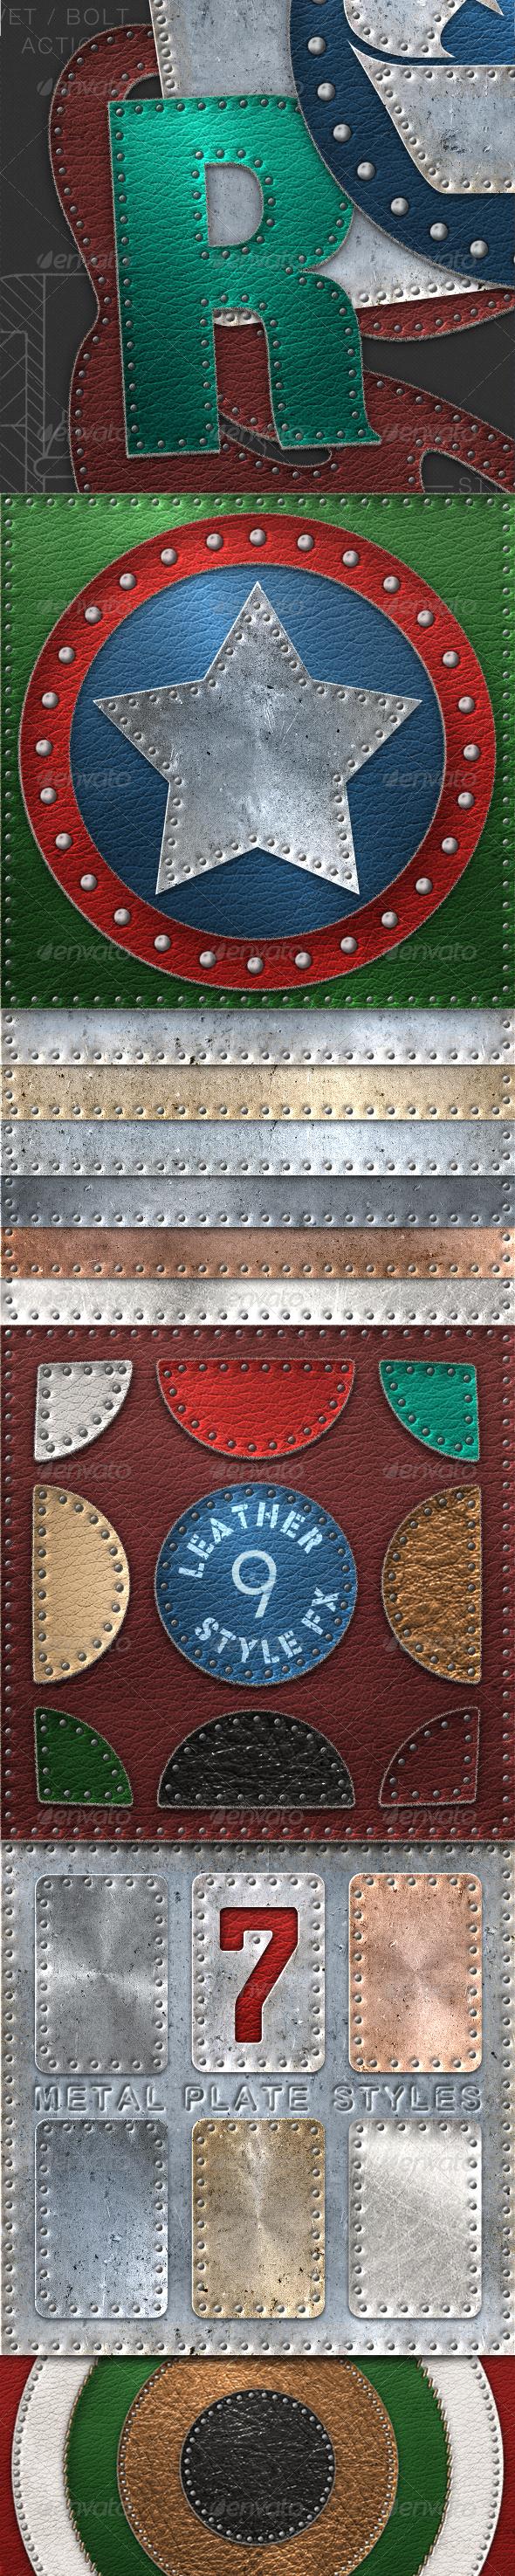 Grunge Rivet Bold Stitch Photoshop Action with Leather and Metal